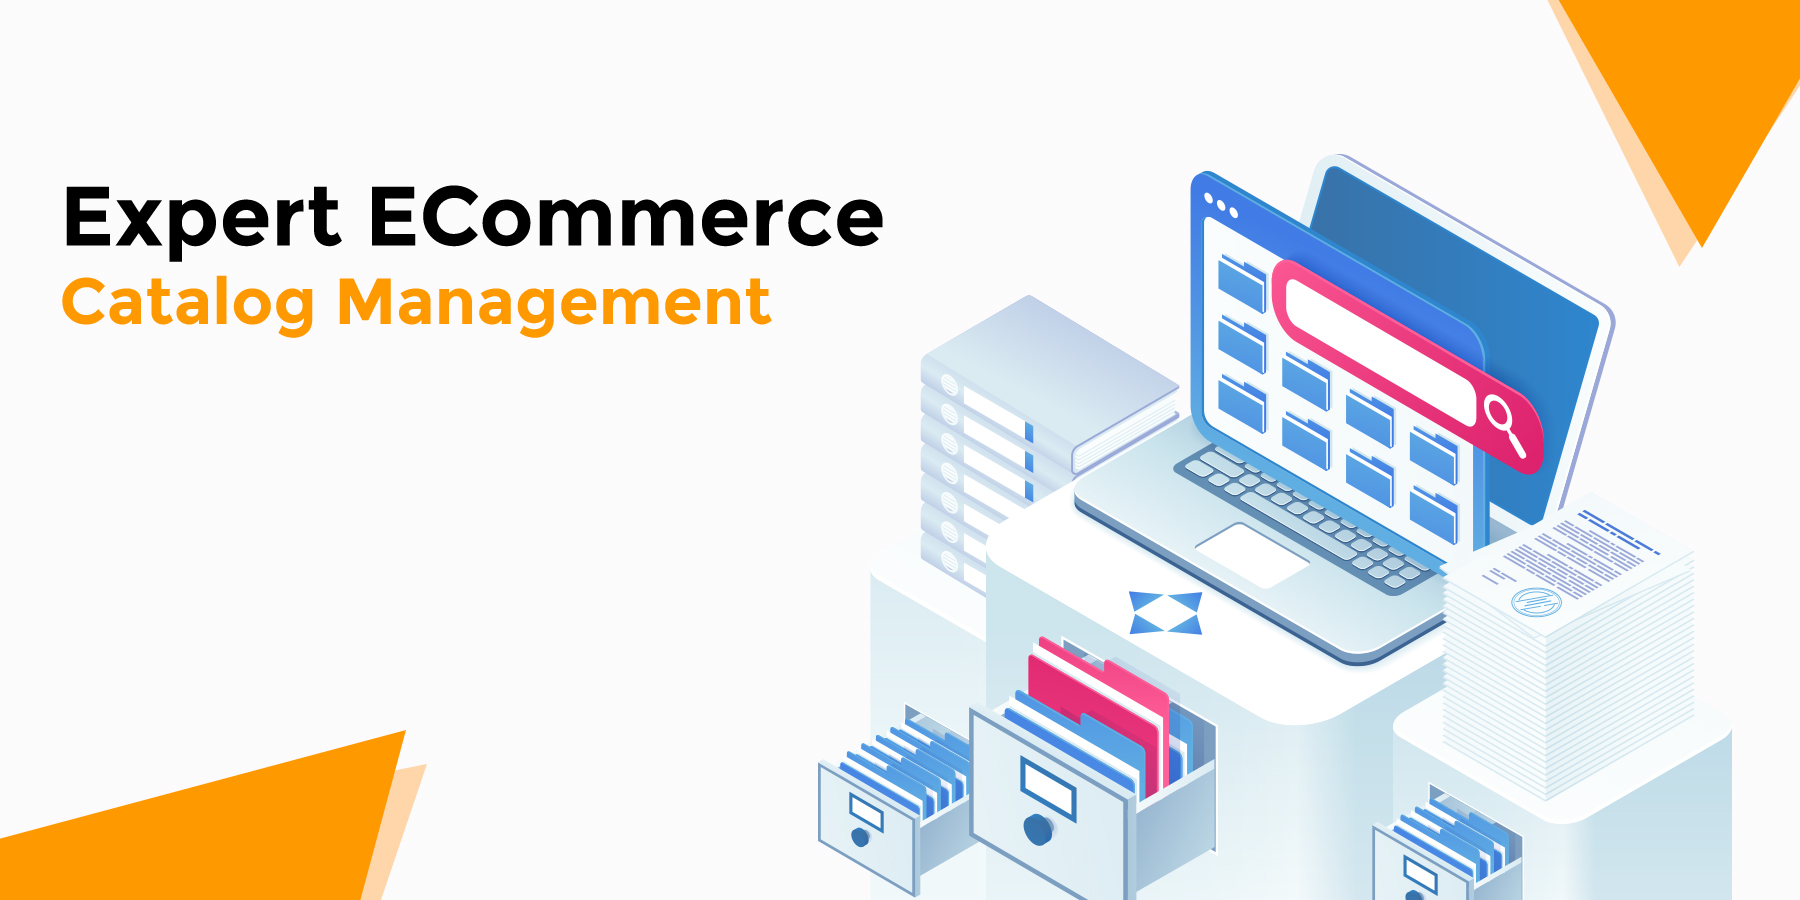 Resolve Common Ecommerce Catalog Management Challenges With The Help Of Experts